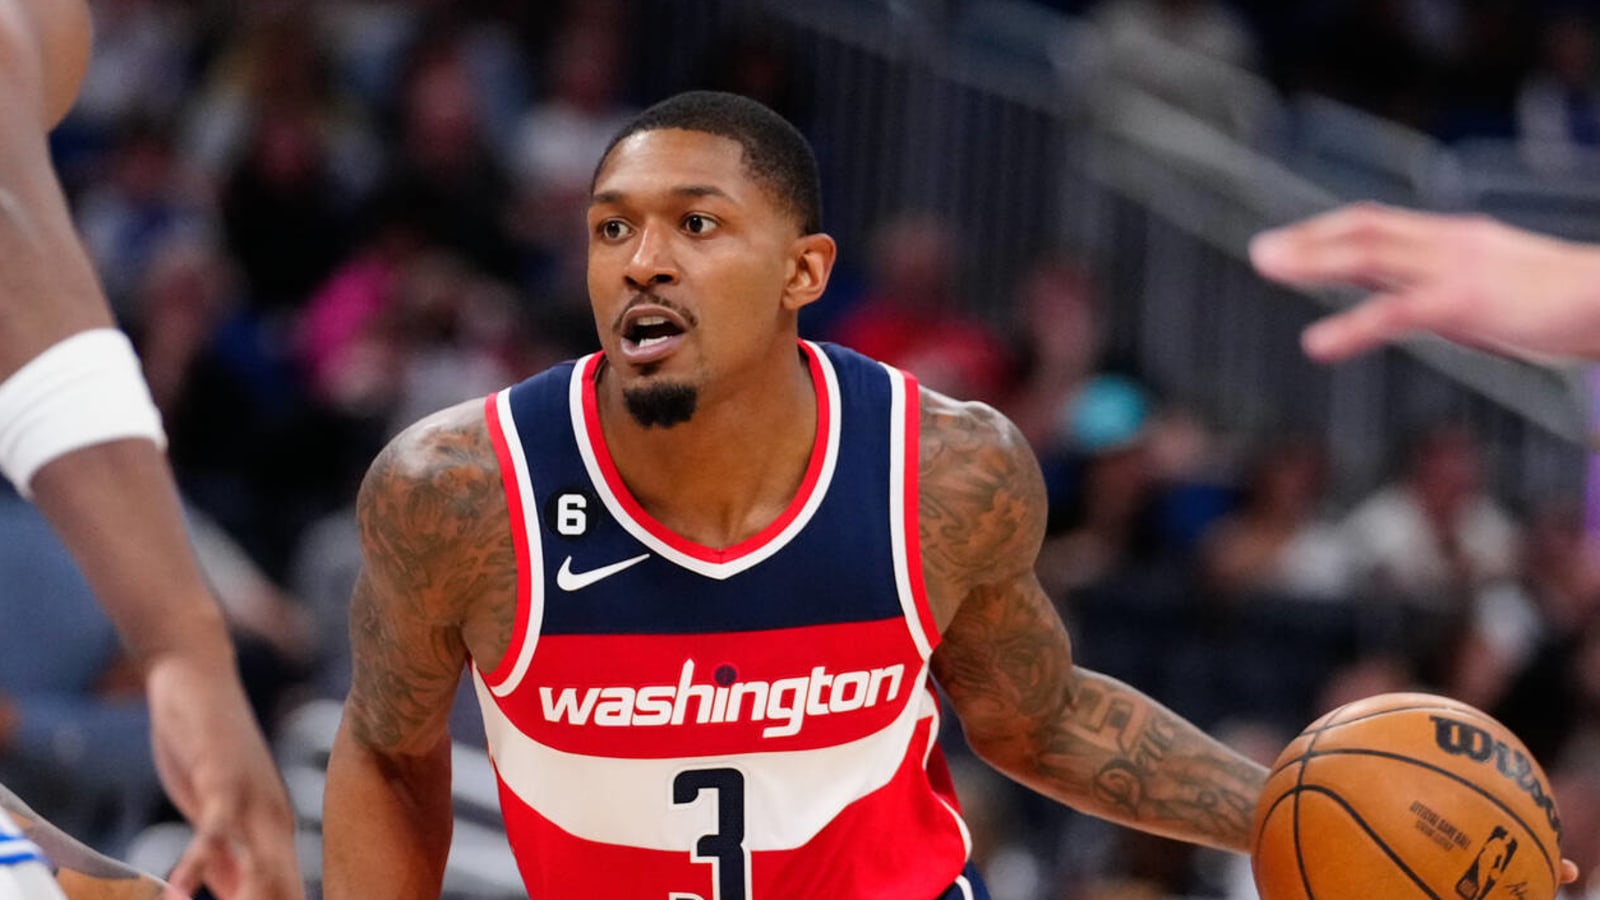 Teams have 'close eye' on Bradley Beal's future with Wizards 